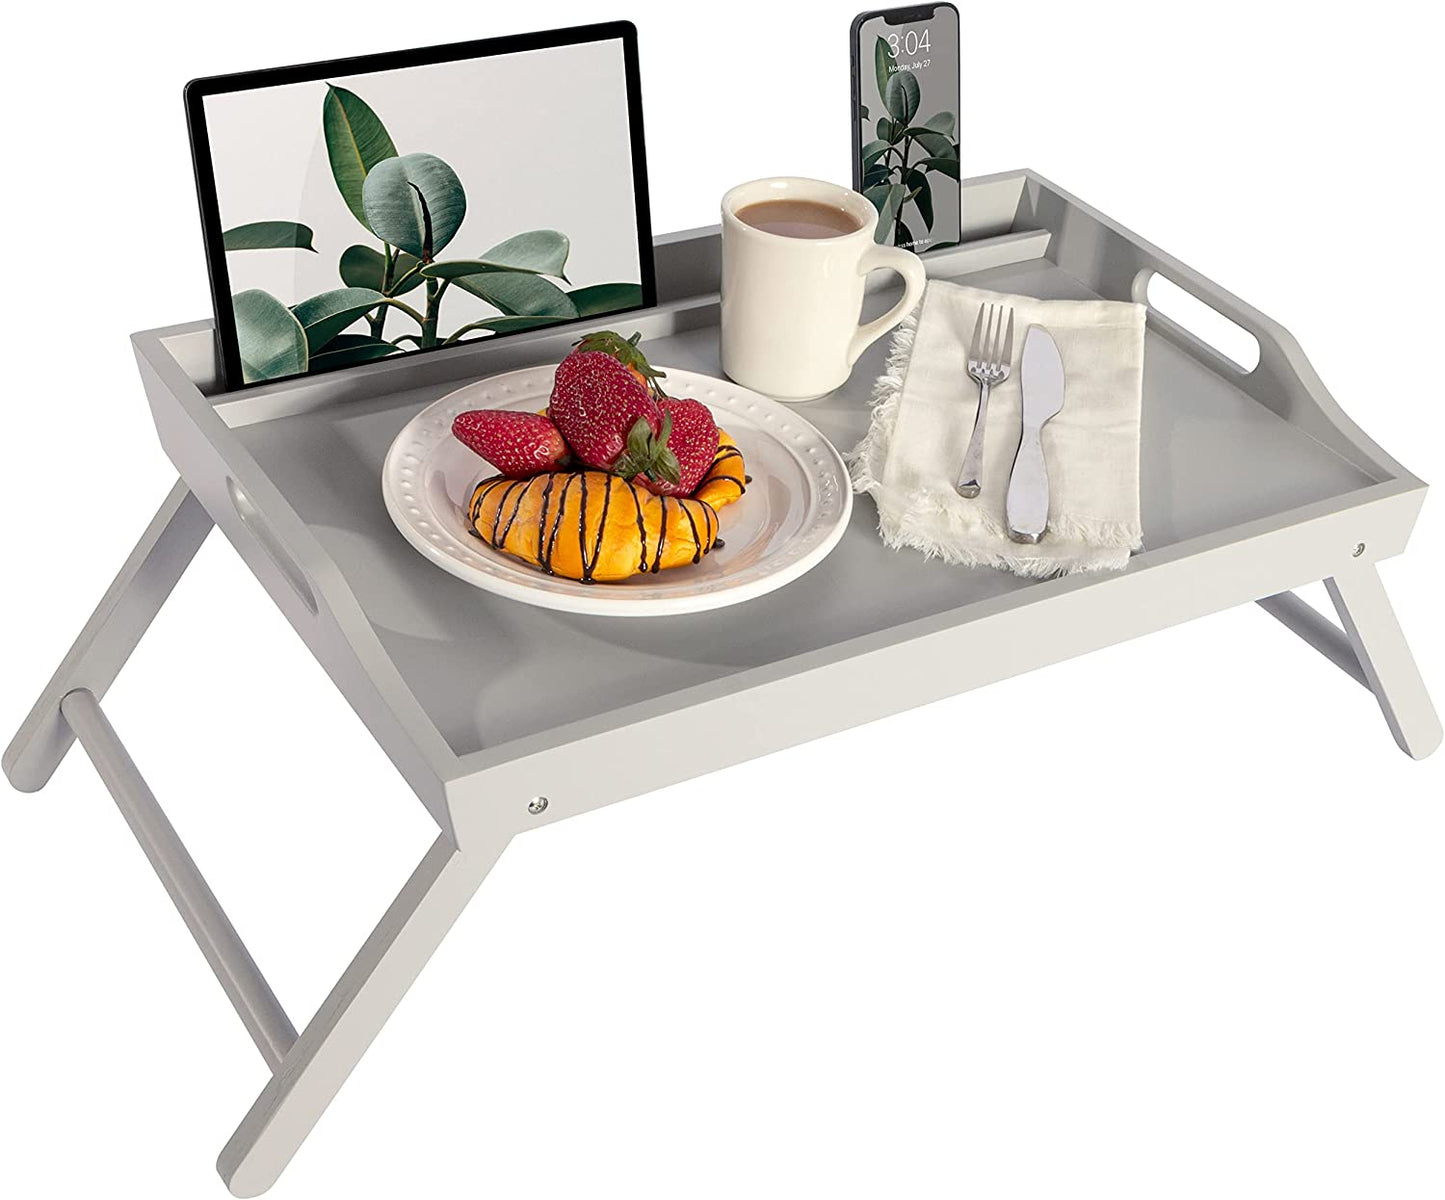 Wood Bed Tray, Lap Desk with Phone Holder - Fits up to 17.3 Inch Laptops and Most Tablets - Calming Gray - Style No. 78105